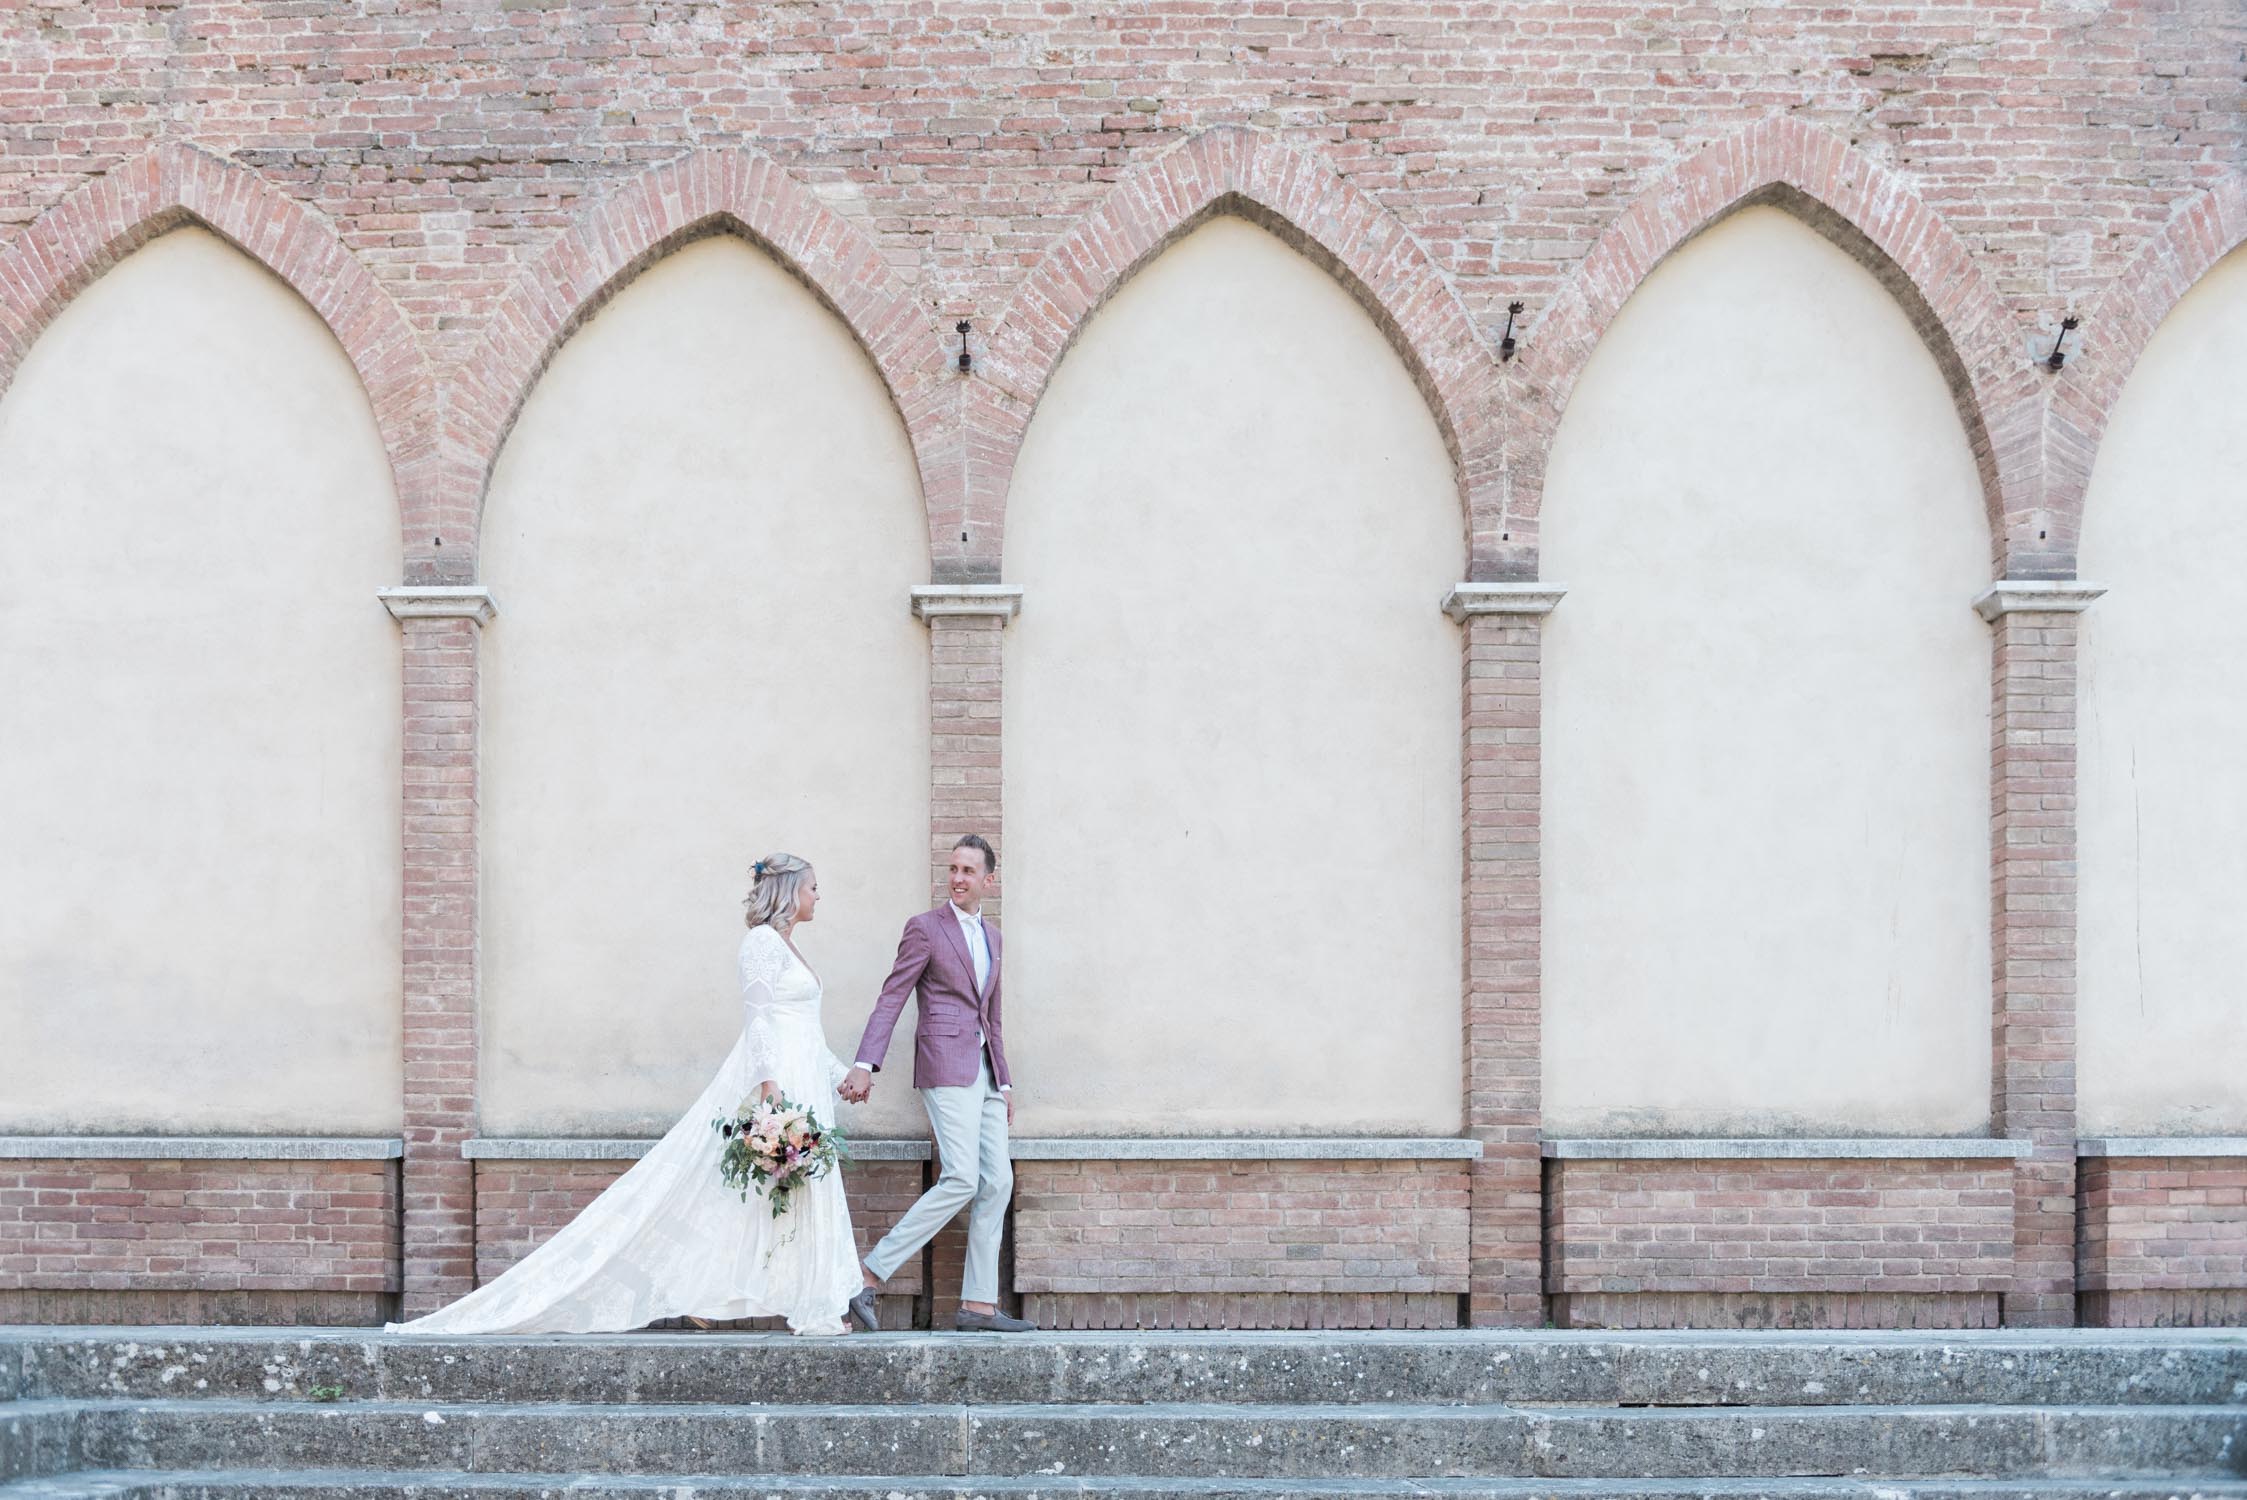 Bride and groom walking past a church in Siena, Tuscany, Italy